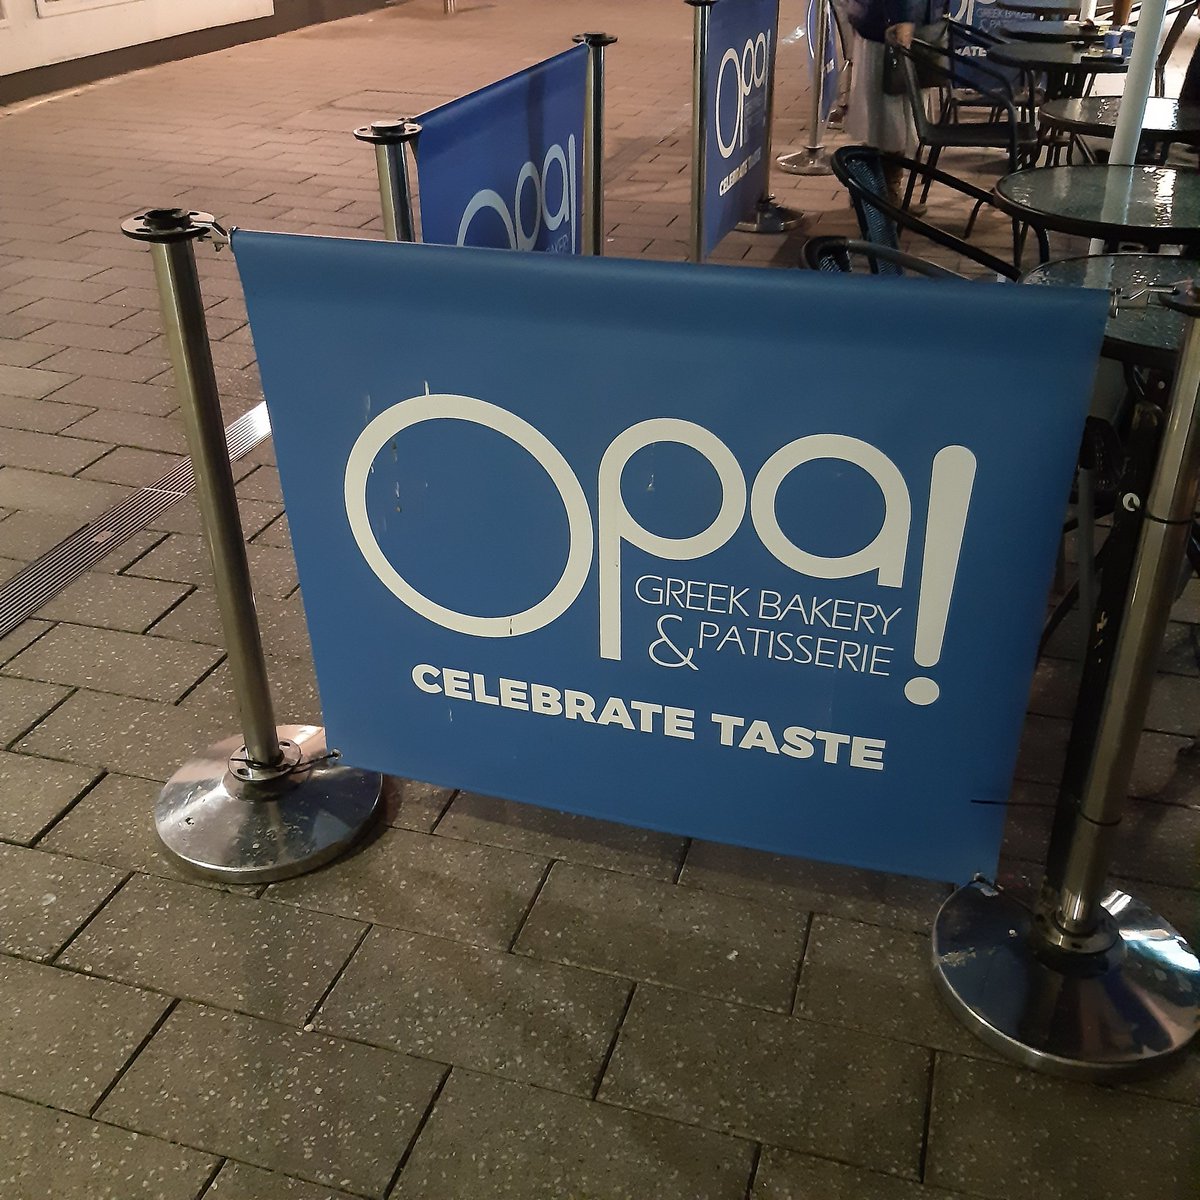 New discovery at @londonoutlet. #OPA 
#GreeksInLondon